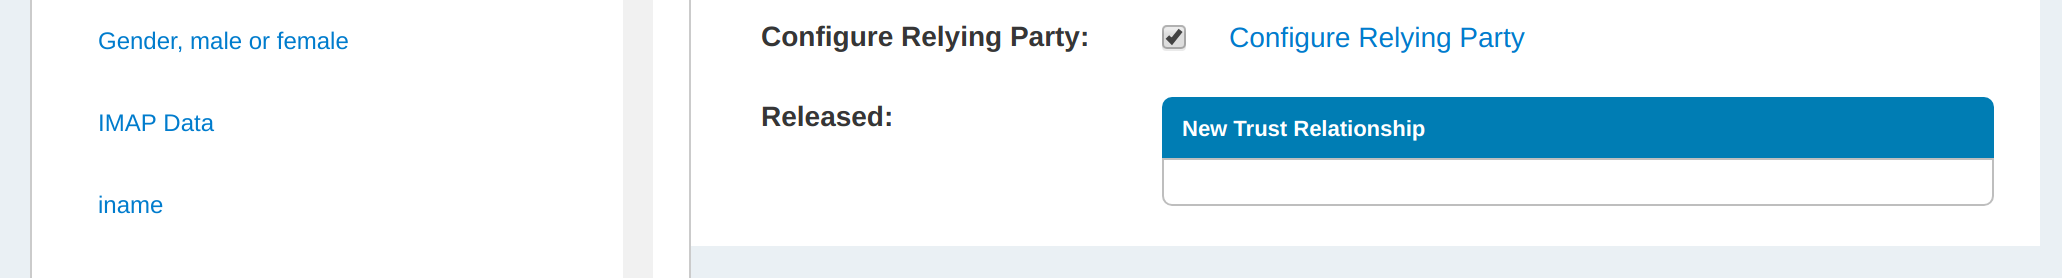 enable-relying-party.png